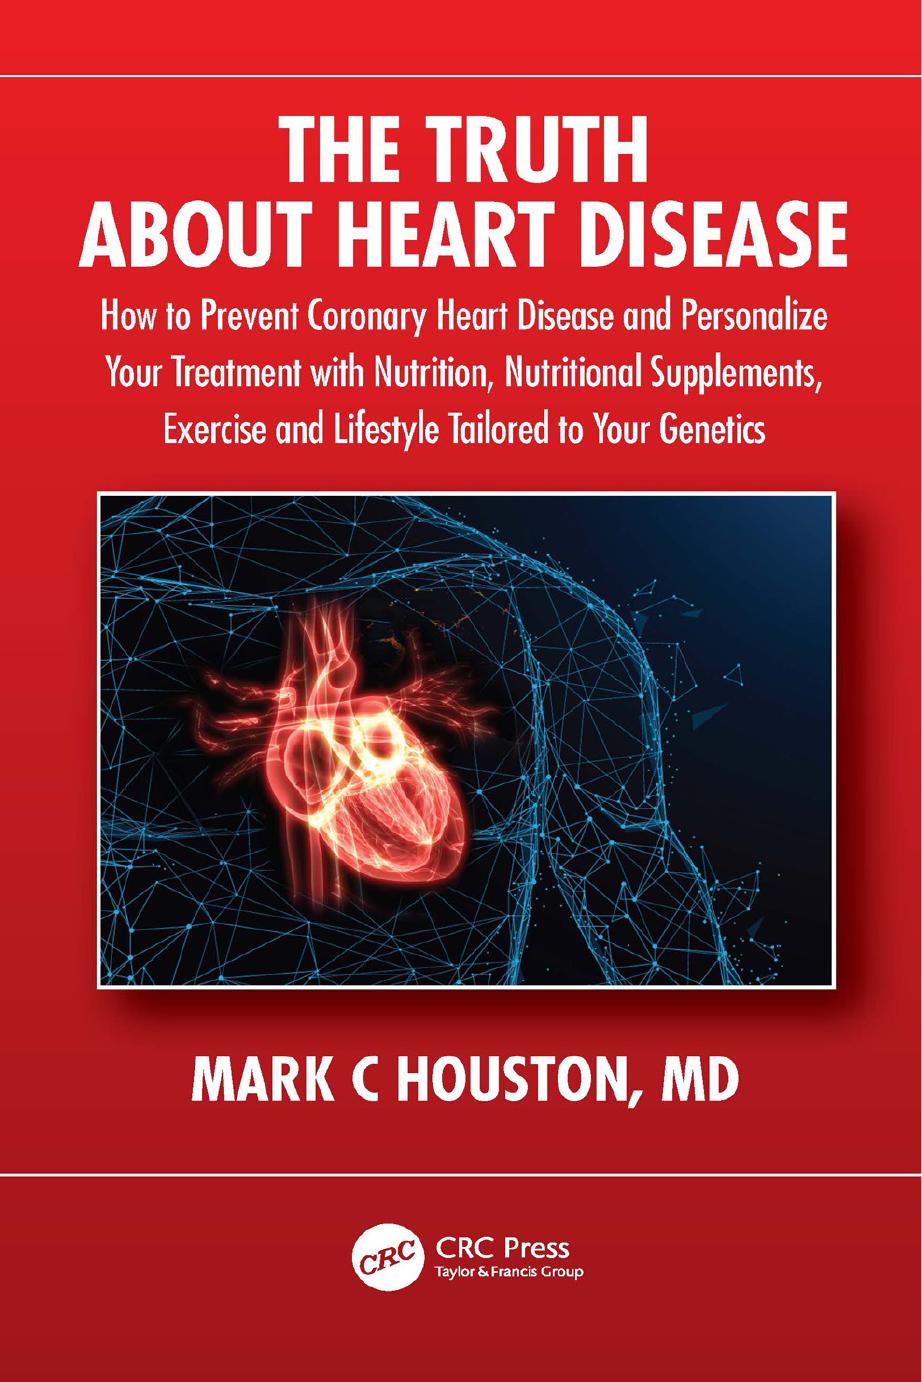 The Truth About Heart Disease: How to Prevent Coronary Heart Disease and Personalize Your Treatment with Nutrition, Nutritional Supplements, Exercise and Lifestyle Tailored to Your Genetics by Mark C. Houston